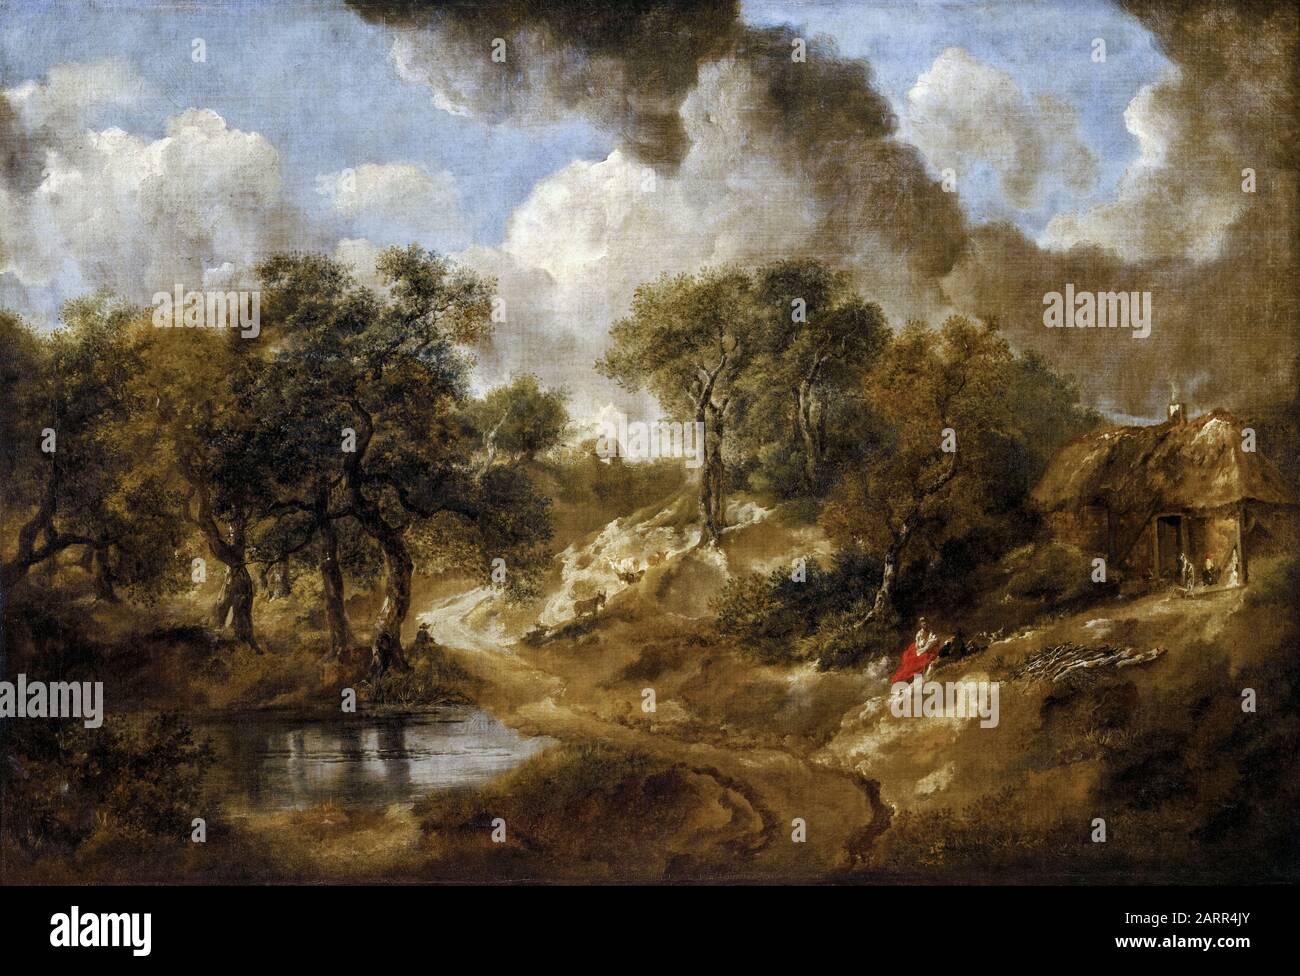 Thomas Gainsborough, Landscape in Suffolk, painting, 1746-1750 Stock Photo